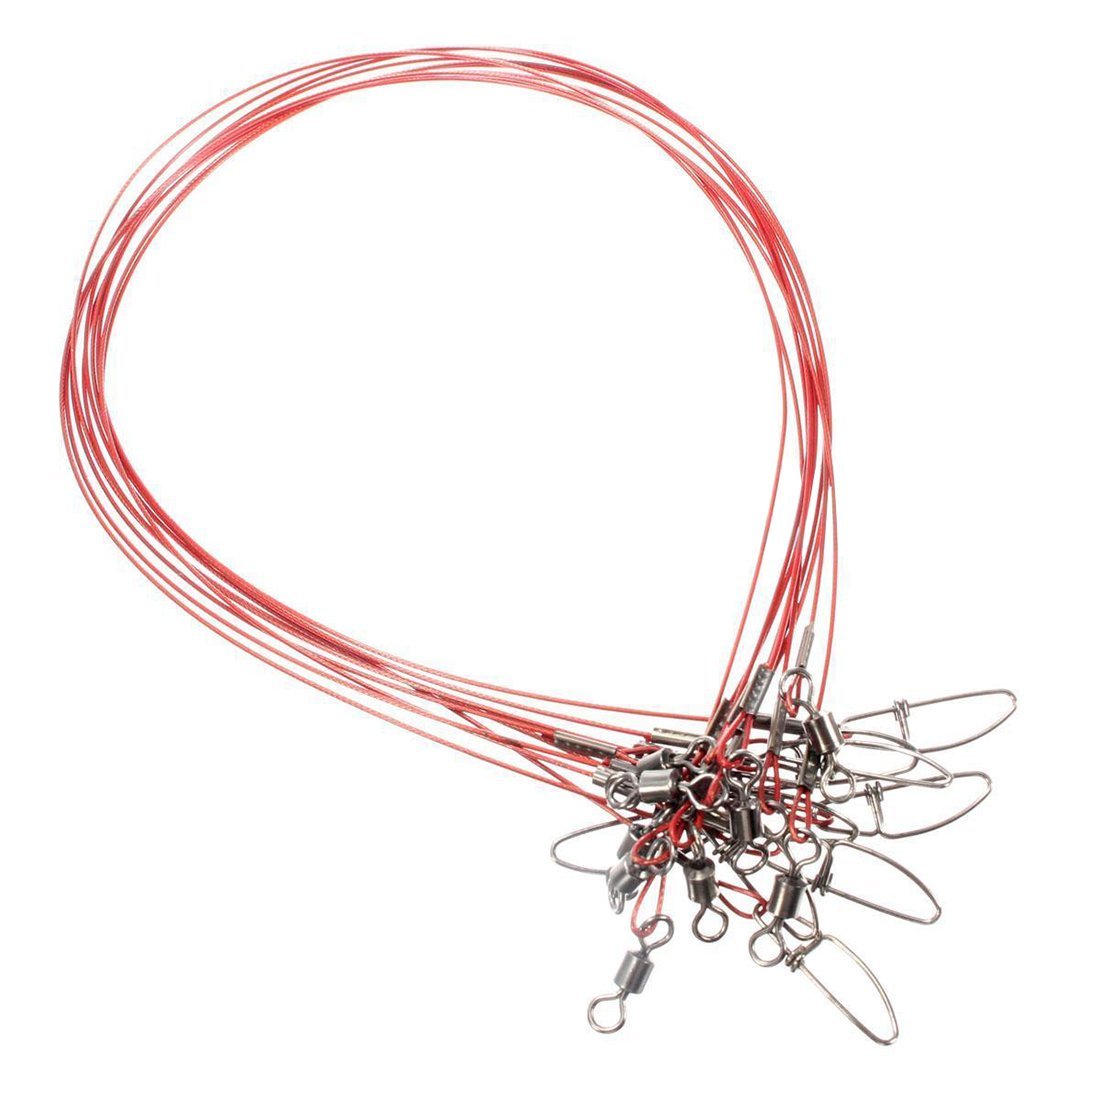 20 Roots Fishing Lures Stainless Steel Trace Wire Leader Spinner Swivel Line-Cherie's Store-Bargain Bait Box